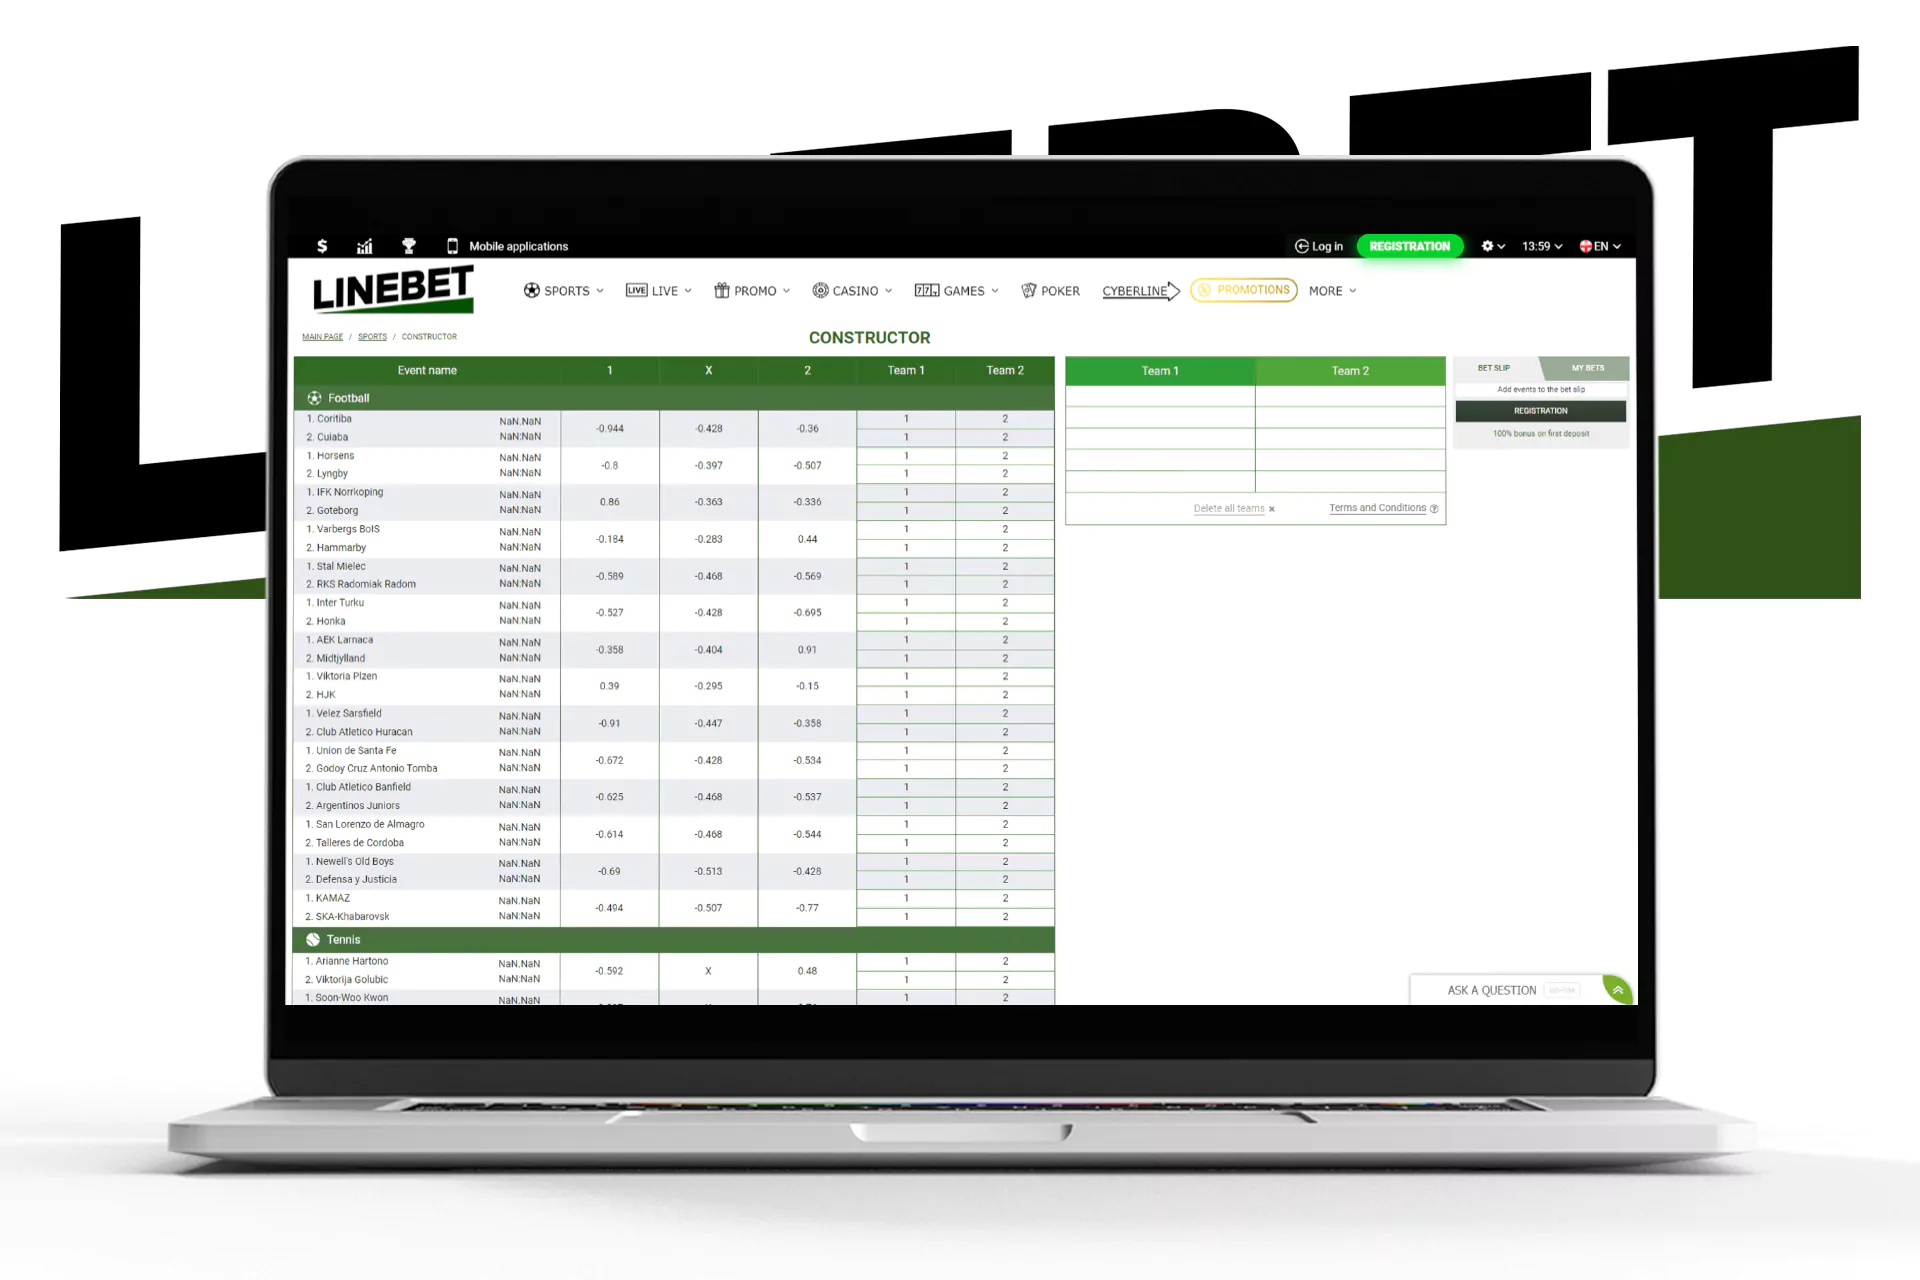 The Bet Constructor tool helps users to place bets on a couple of teams simultaneously.